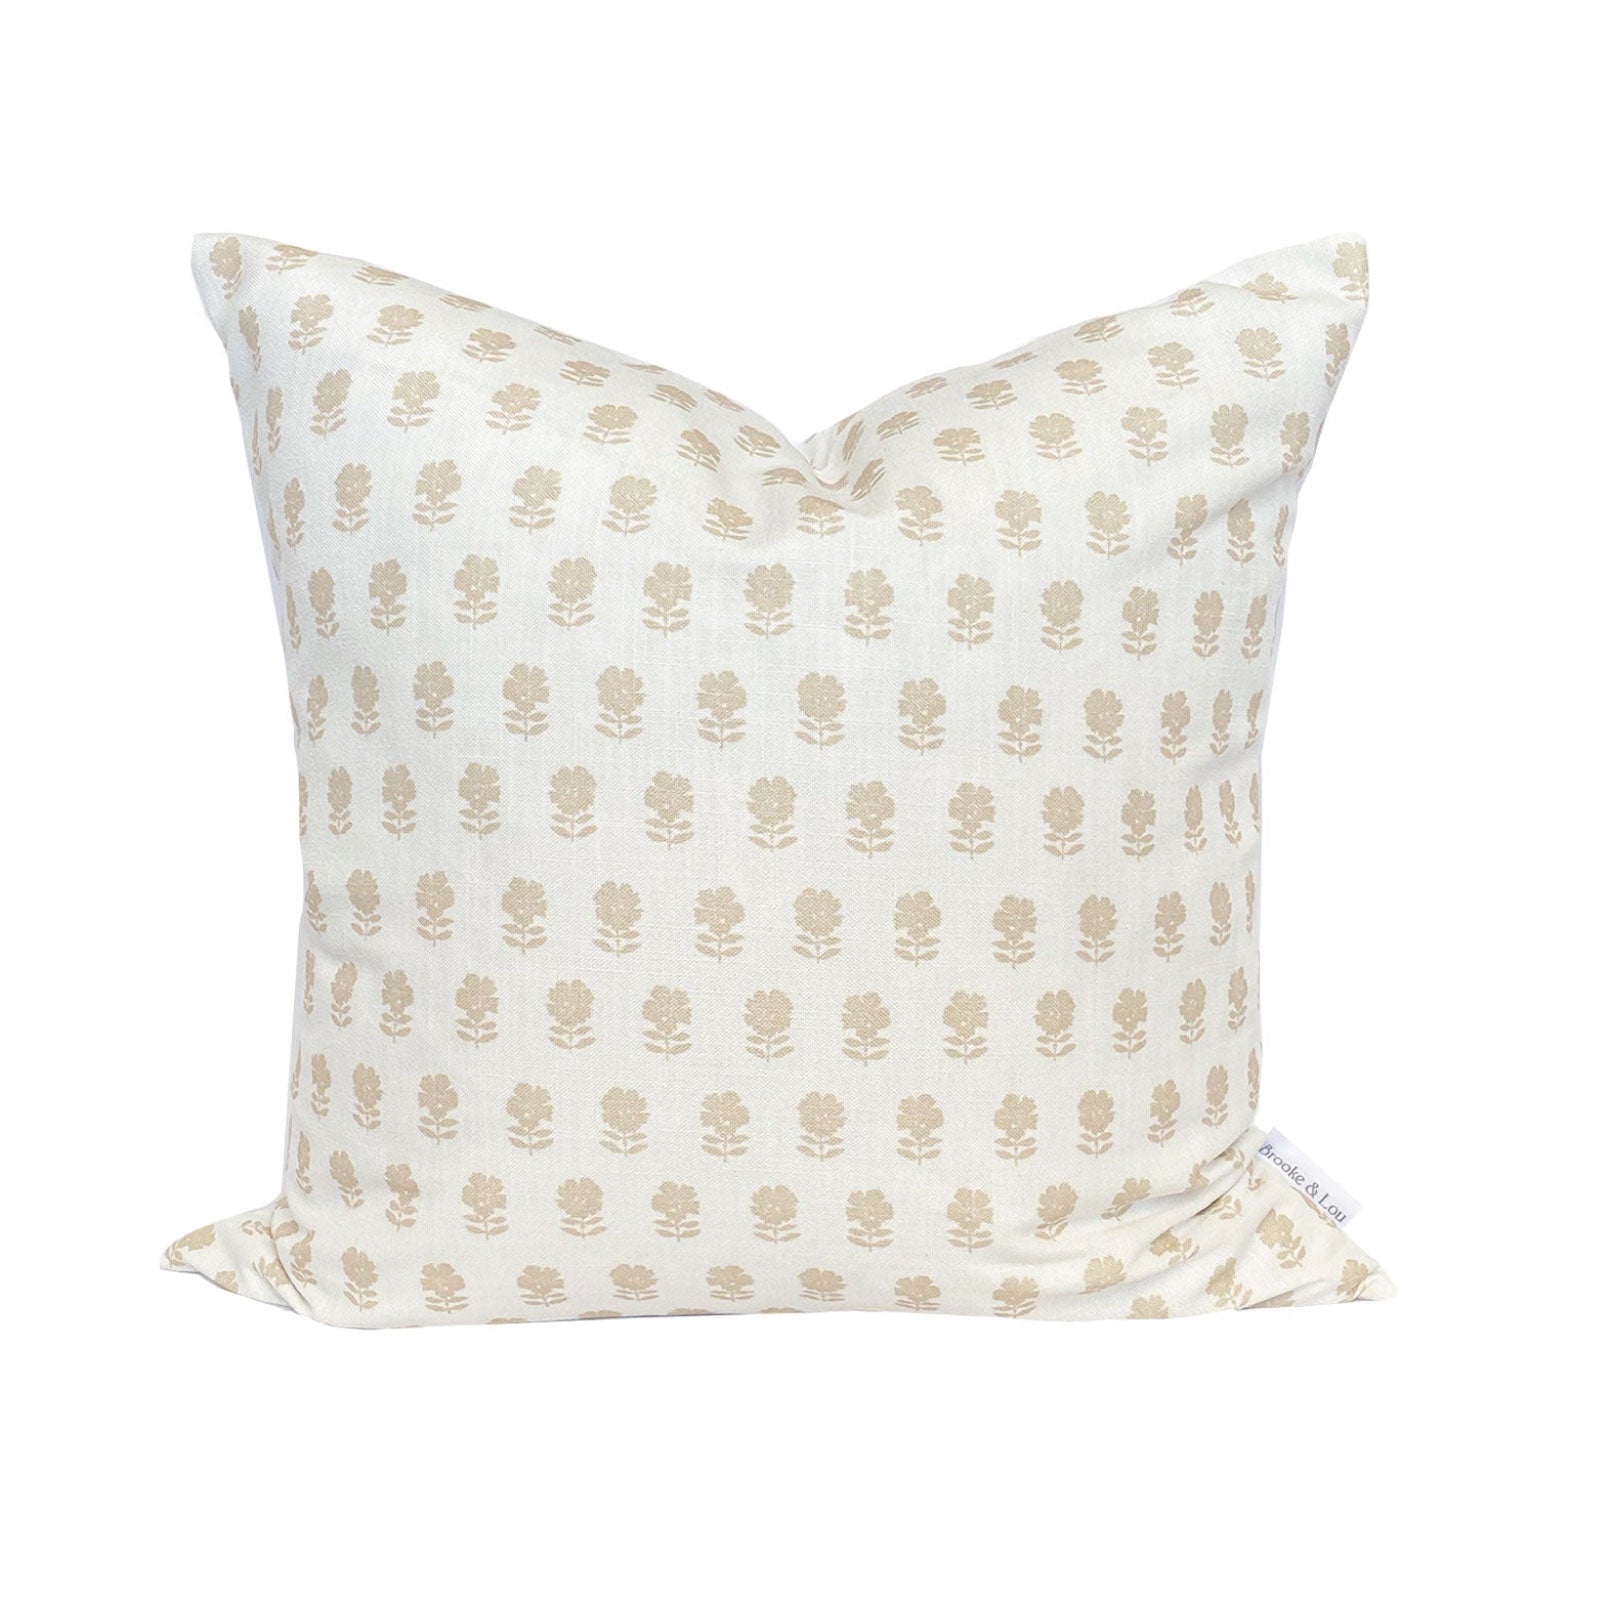 Lulu Floral Pillow in Natural